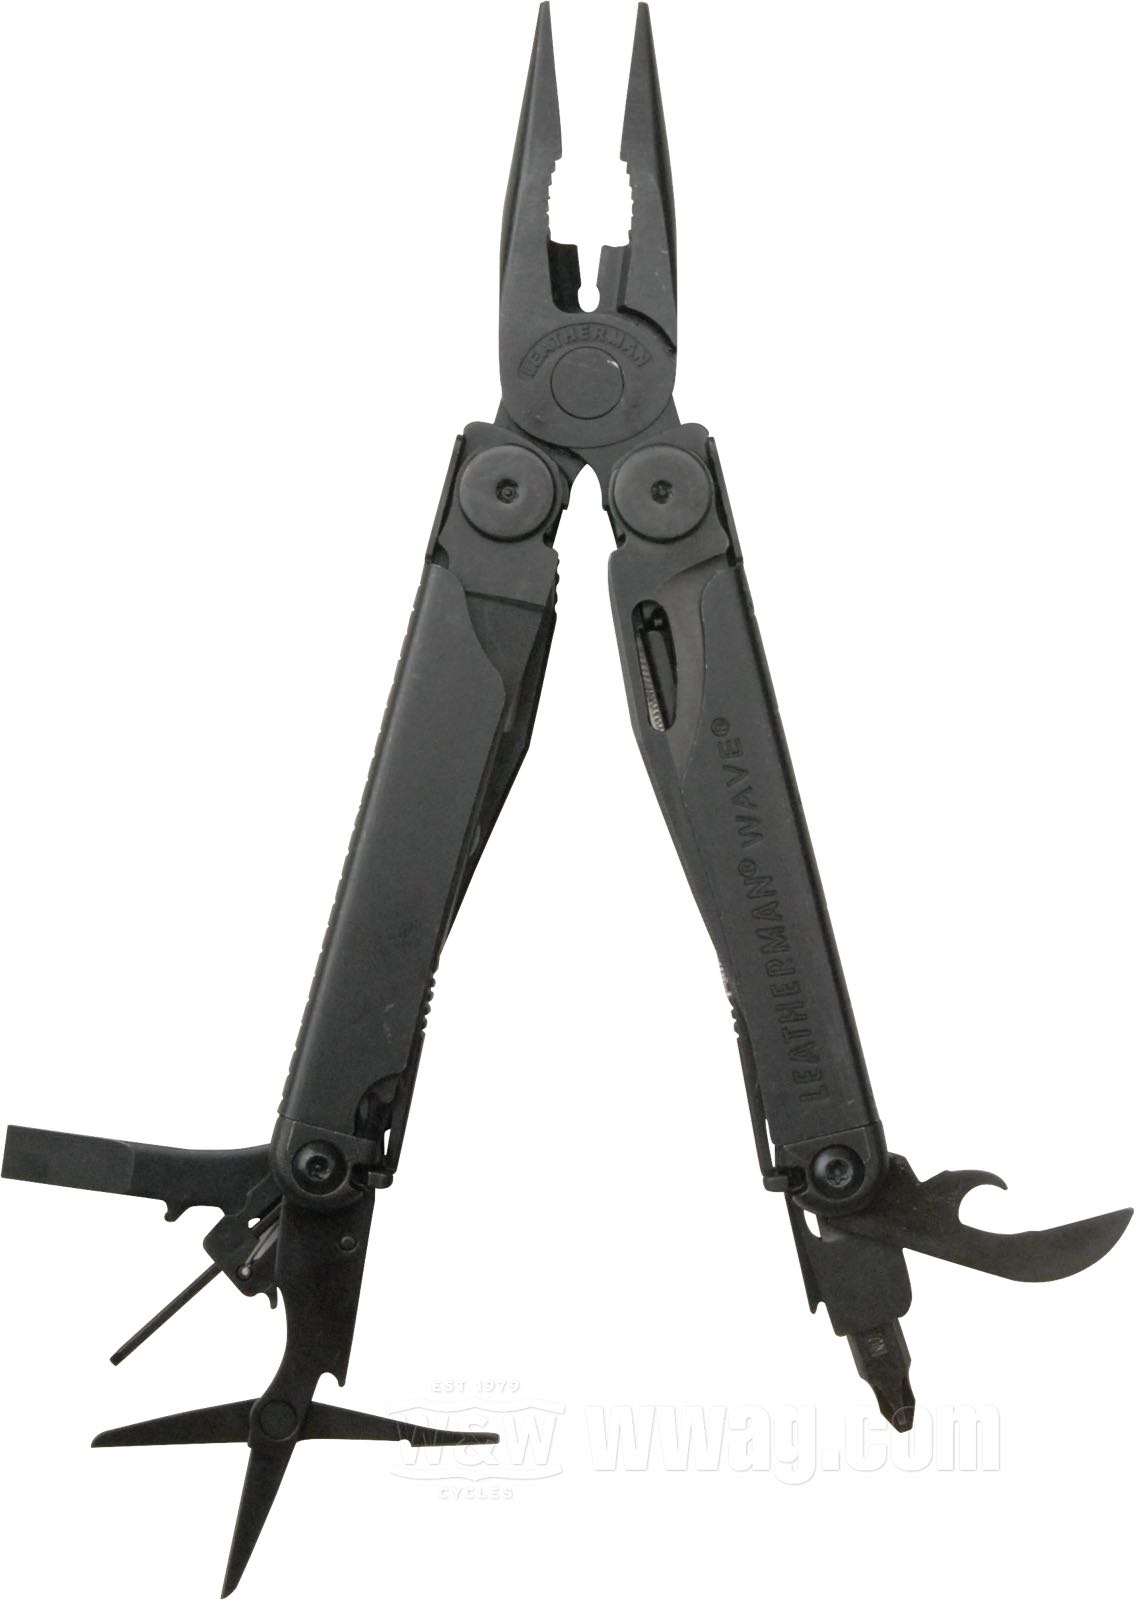 W&W Cycles - Multitool »WAVE« by Leatherman